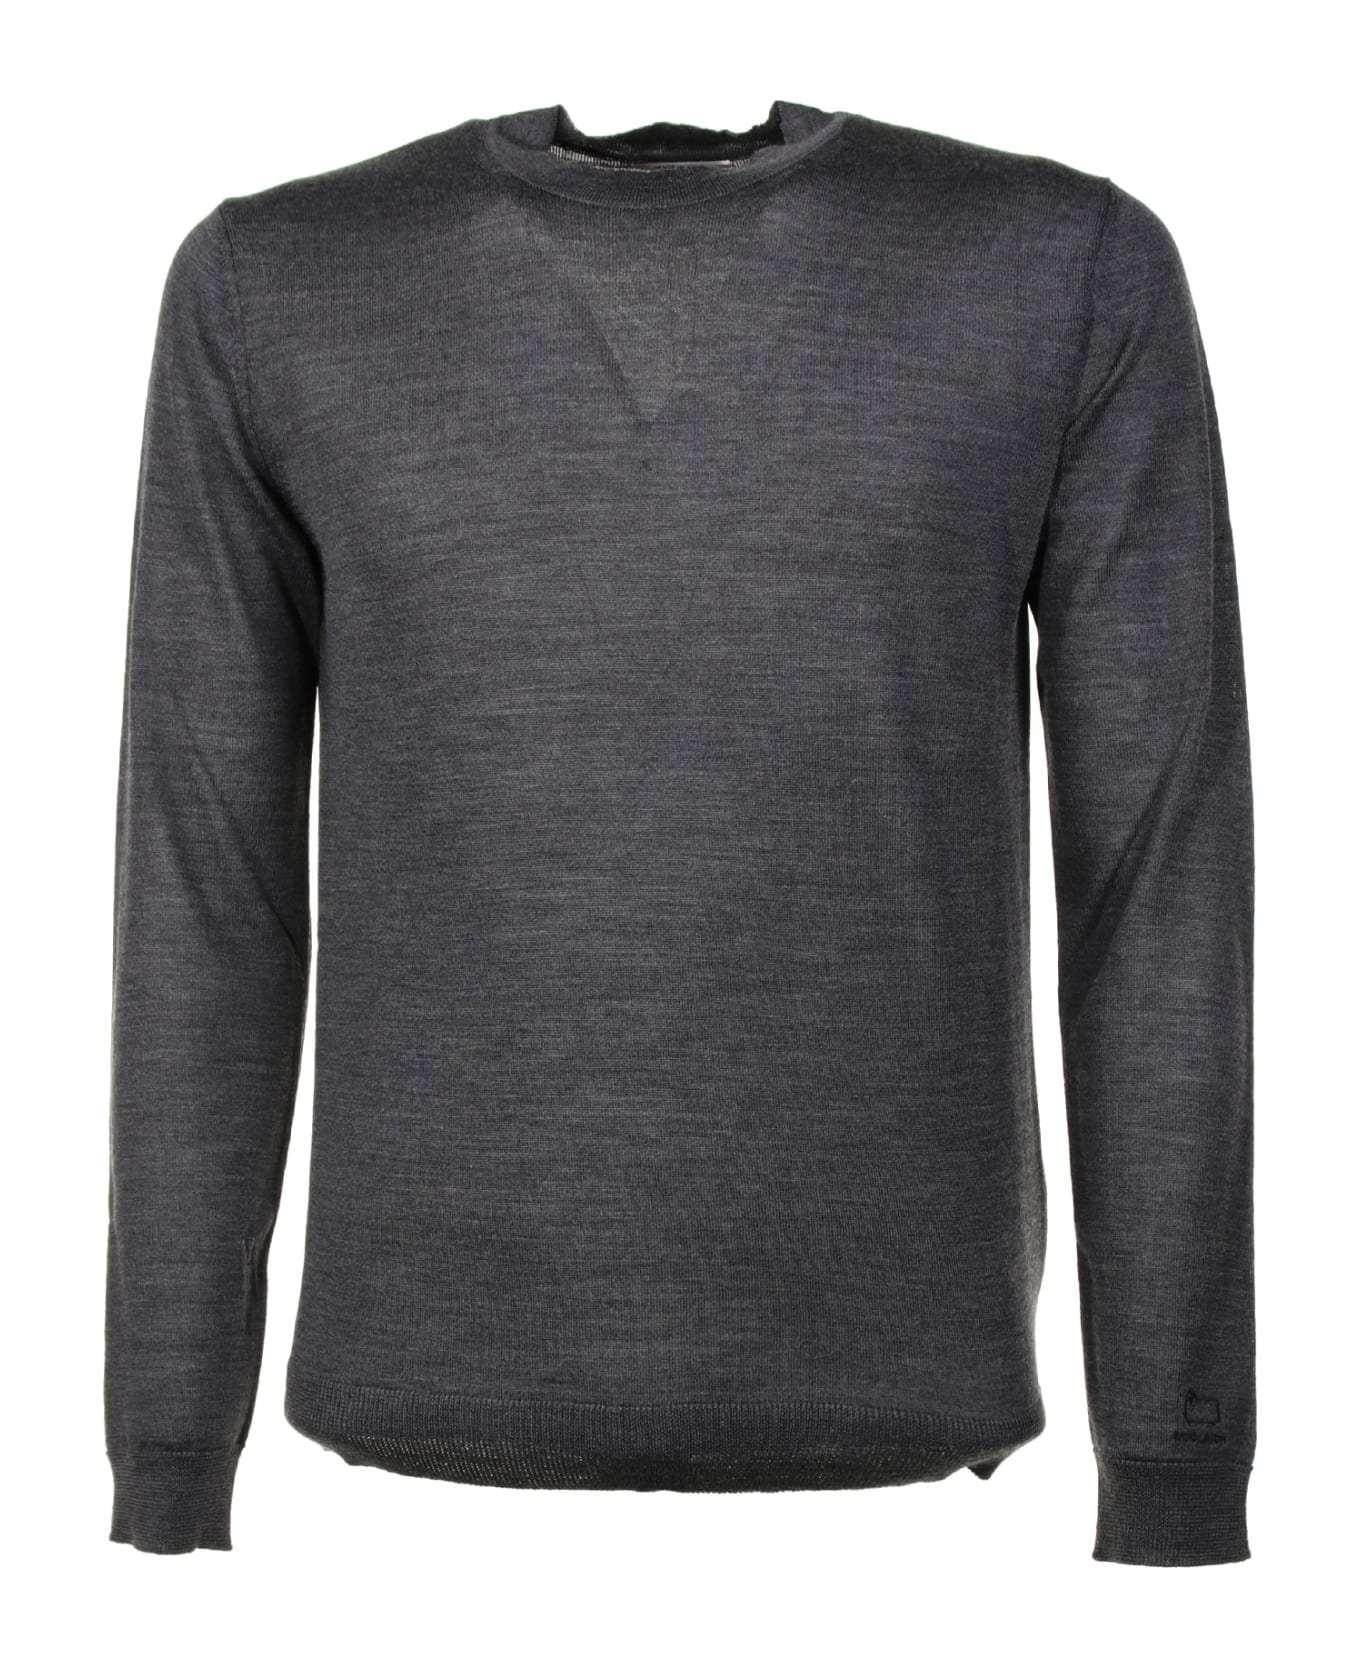 Woolrich Crewneck Sweater - CHARCOAL ニットウェア